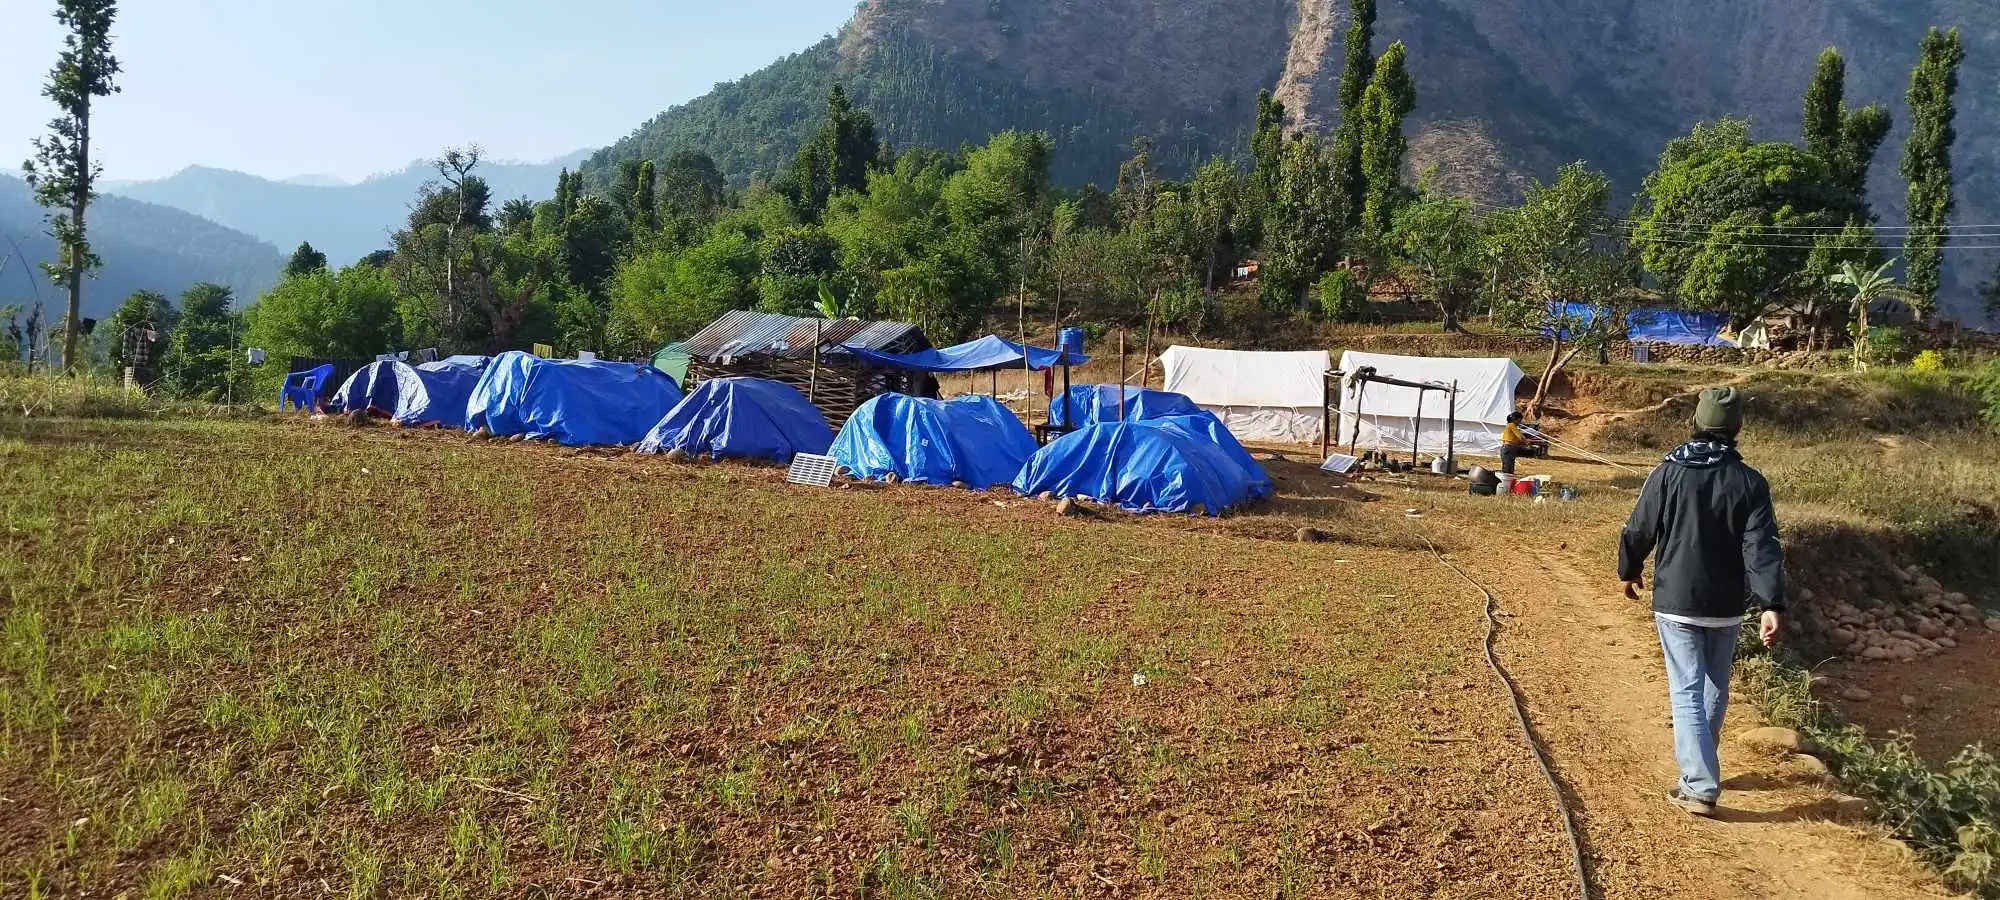 Forgotten and Freezing: Earthquake survivors stranded in tarpaulin tents as local govts await financial aid 